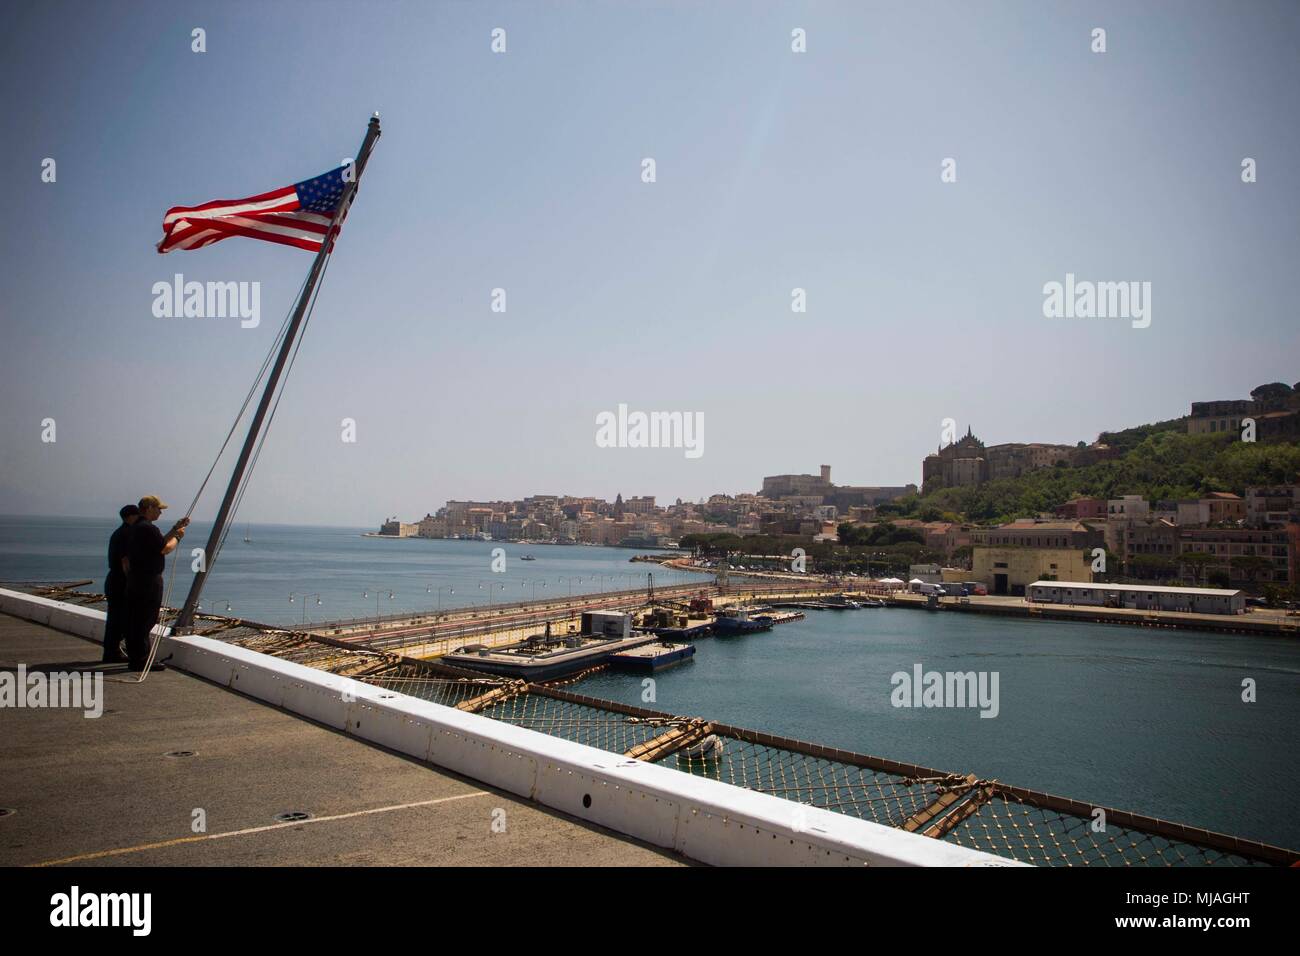 GAETA, Italy (April 25, 2018)  U.S. Navy Sailors lower the American flag aboard the San Antonio-class amphibious transport dock USS New York (LPD 21) as the ship departs Gaeta, Italy, April 25, 2018. The port stop was an opportunity to enhance U.S.-Italy relations as the two nations work together for a stable, secure and prosperous Europe. U.S. 6th Fleet, headquartered in Naples, Italy, conducts the full spectrum of joint and naval operations, often in concert with allied and interagency partners, in order to advance U.S. national interests and security and stability in Europe and Africa. (U.S Stock Photo